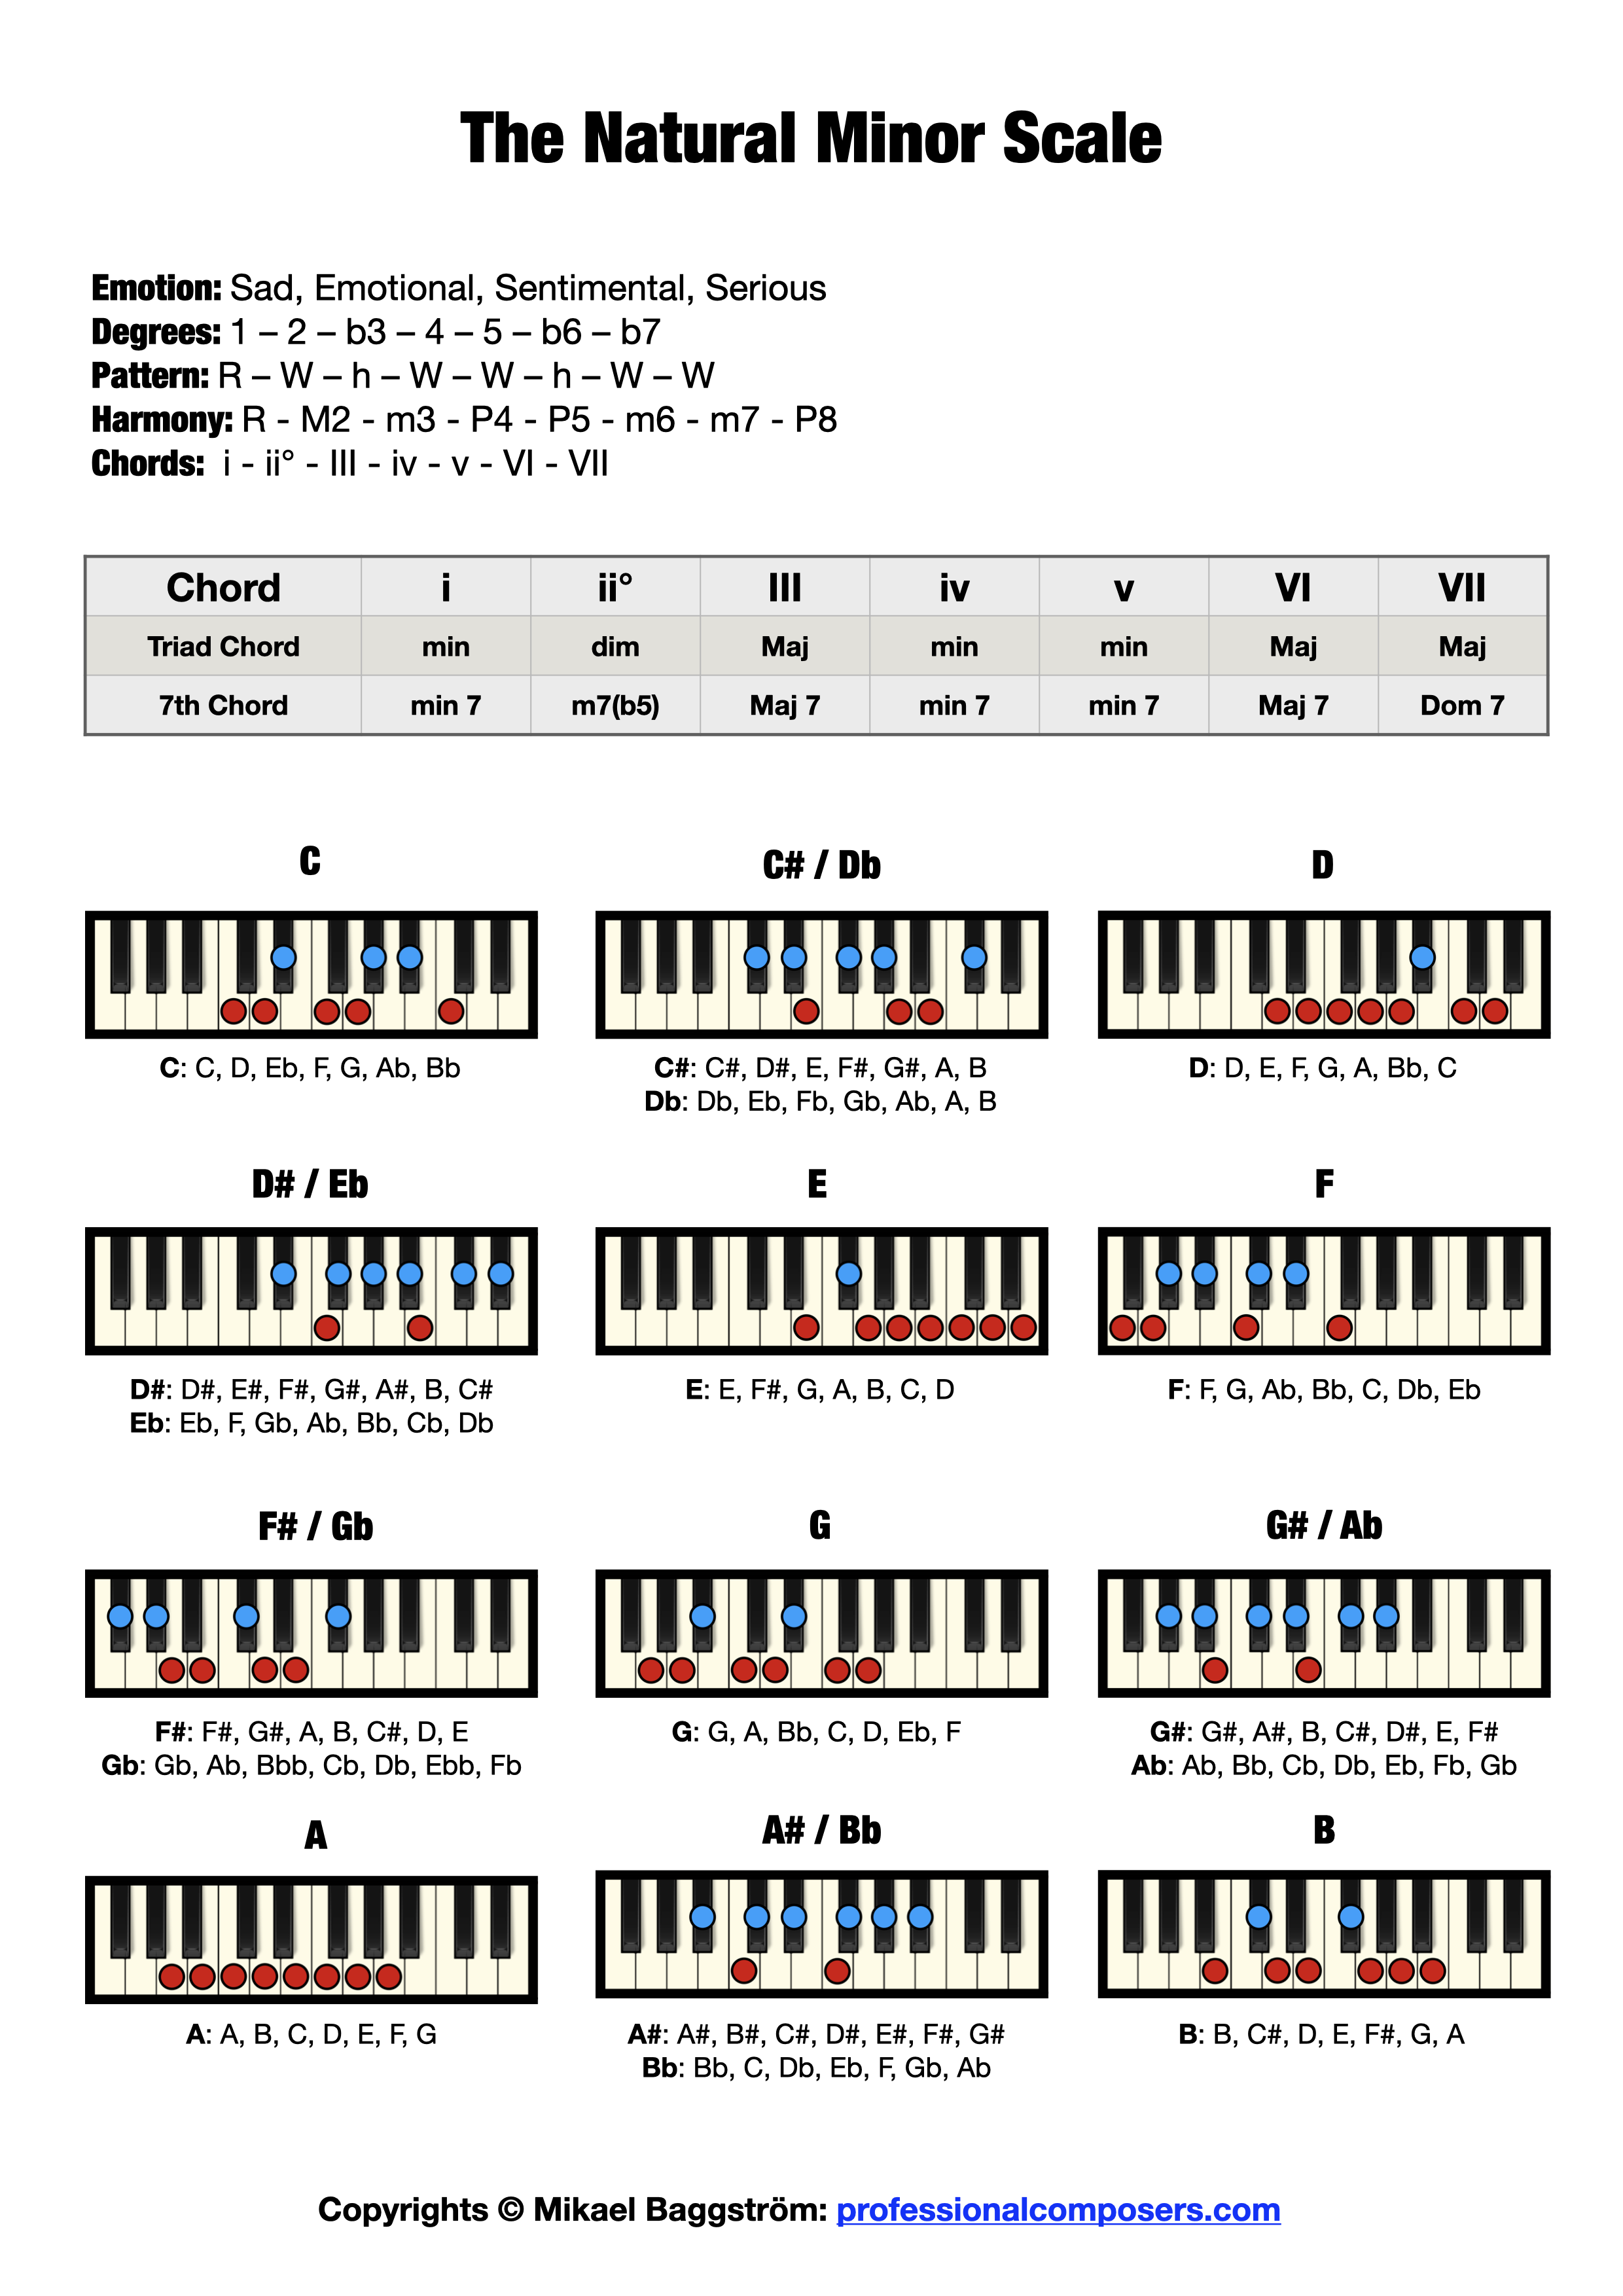 The Minor Scale on Piano (Free Chart + Pictures) Professional Composers